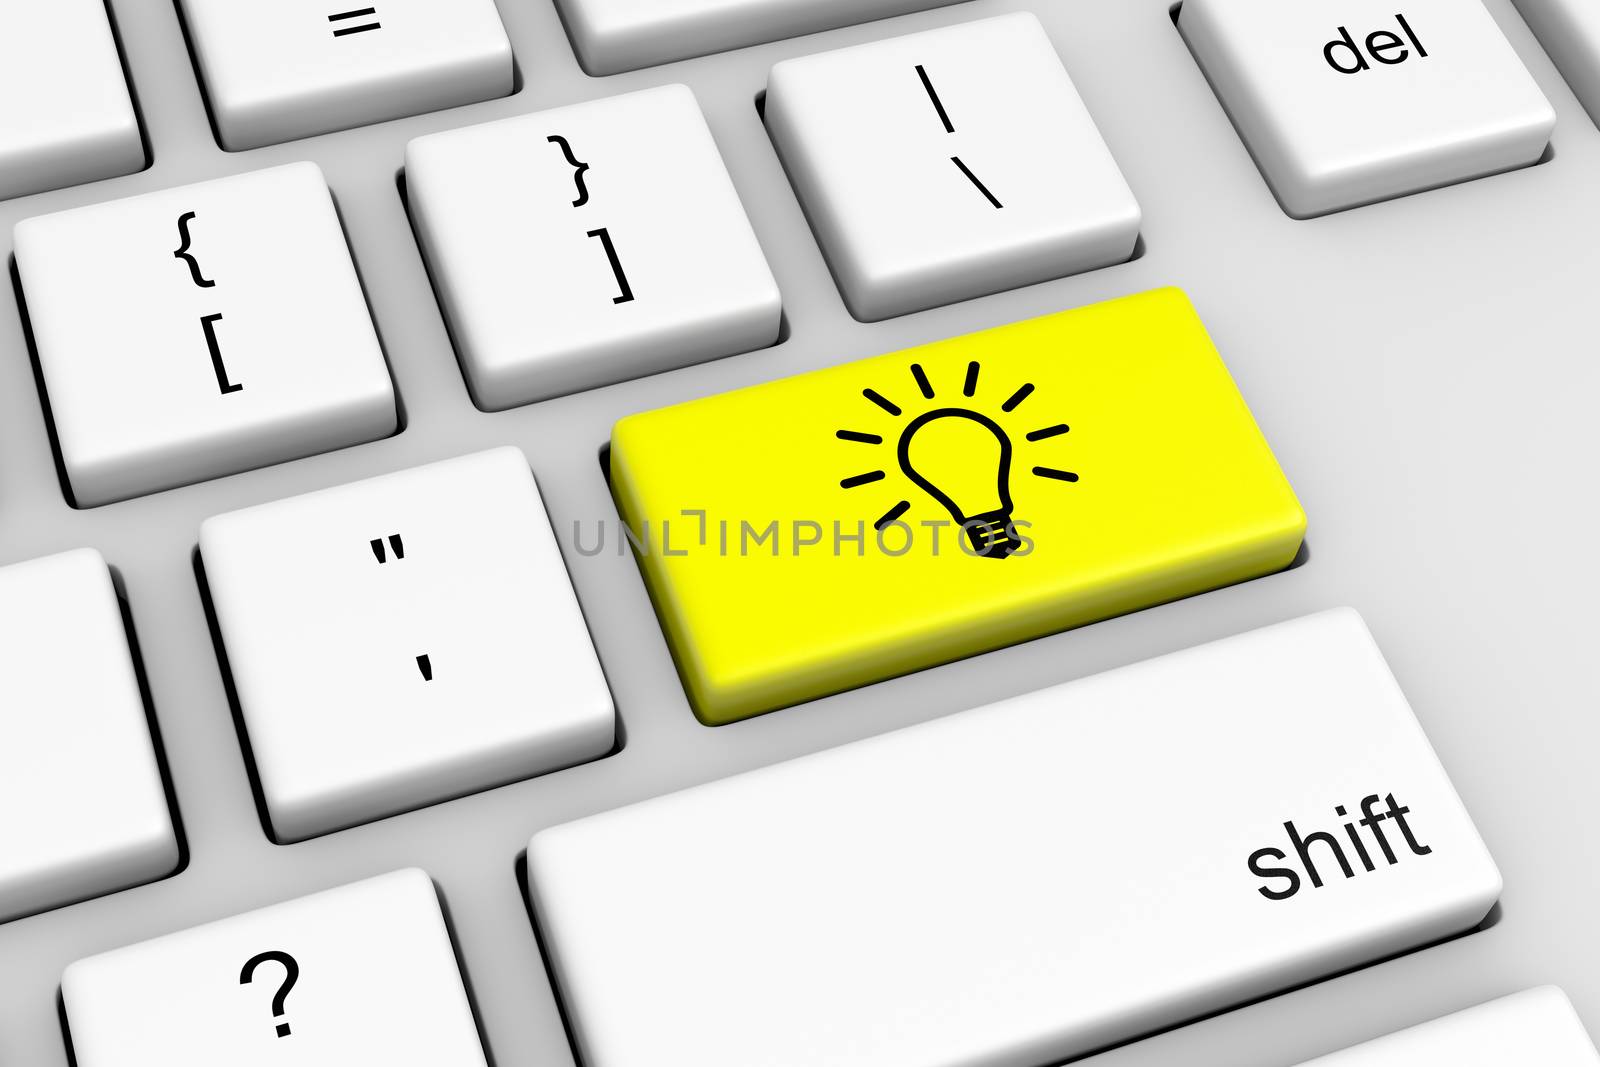 Computer Keyboard with Yellow Light Bulb Button Illustration